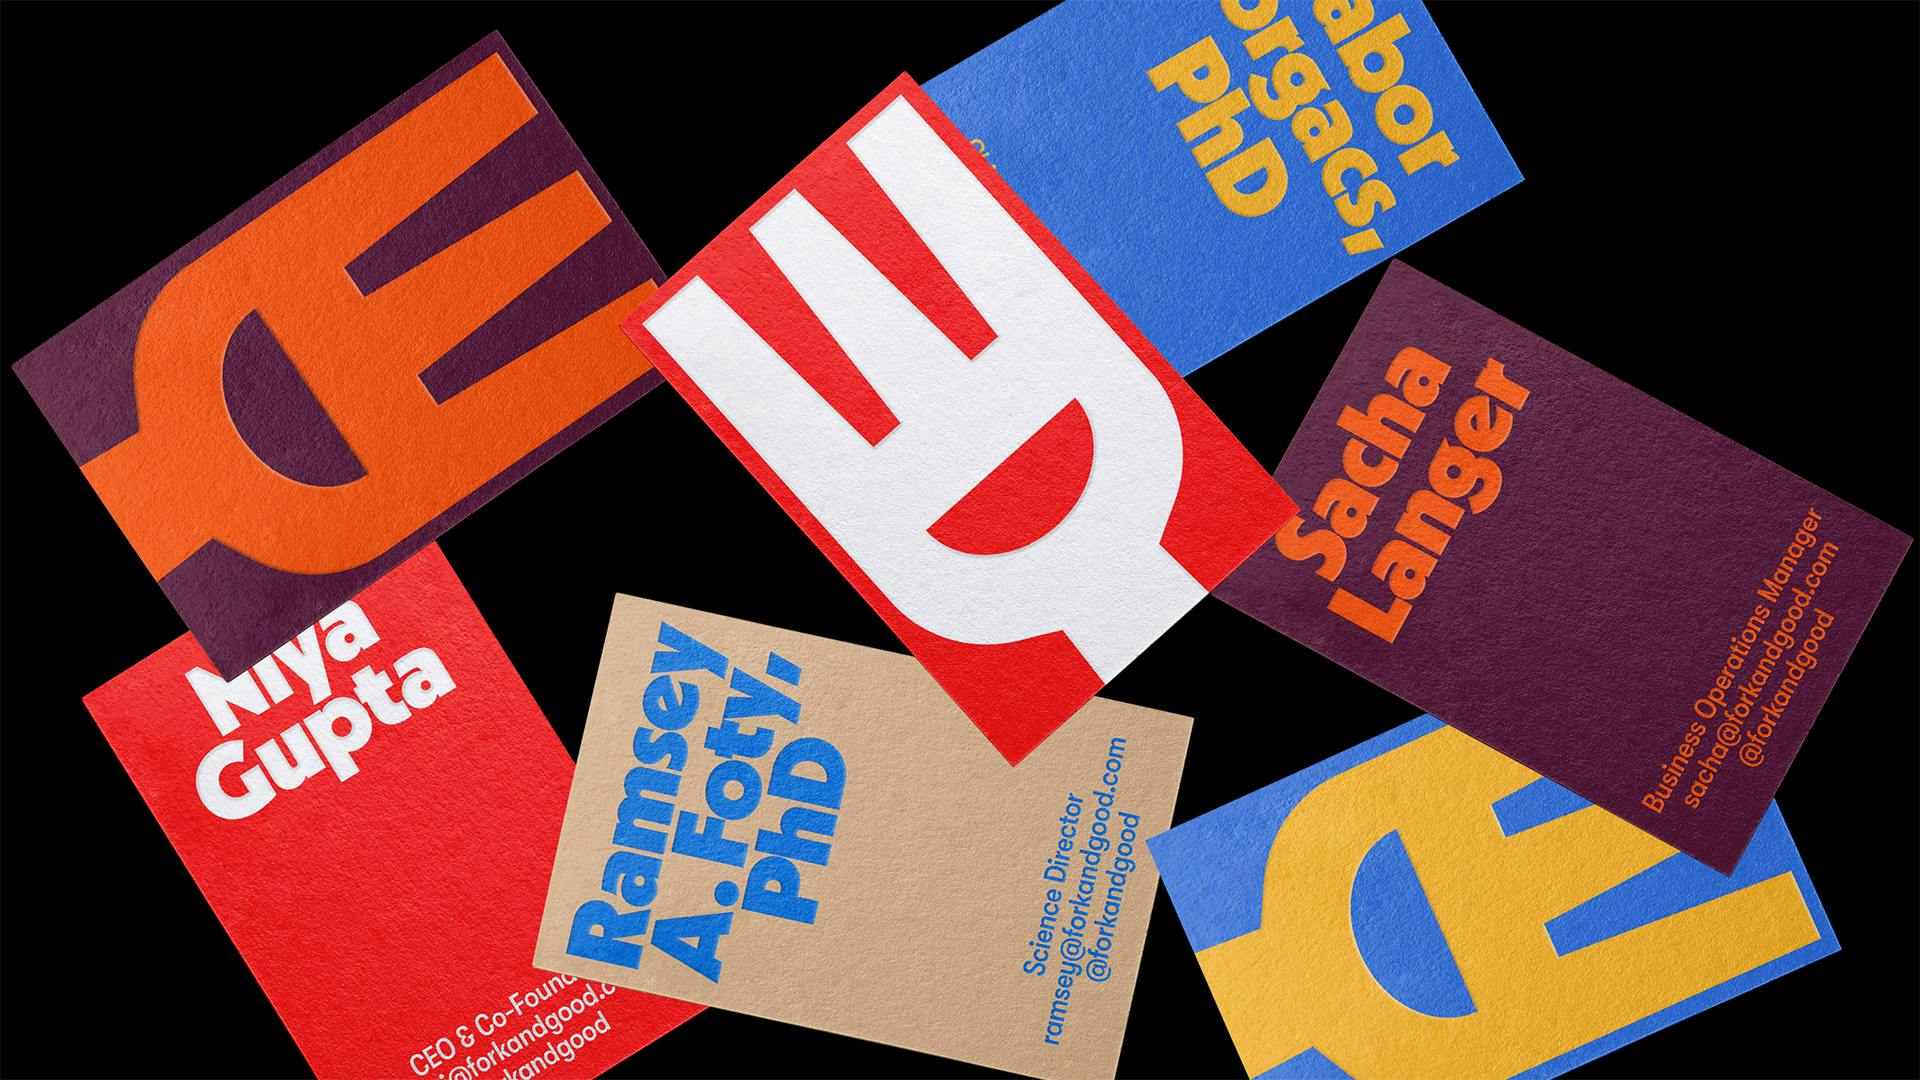 Image shows scattered poster designs for Fork & Good featuring its new branding and fork-shaped logo